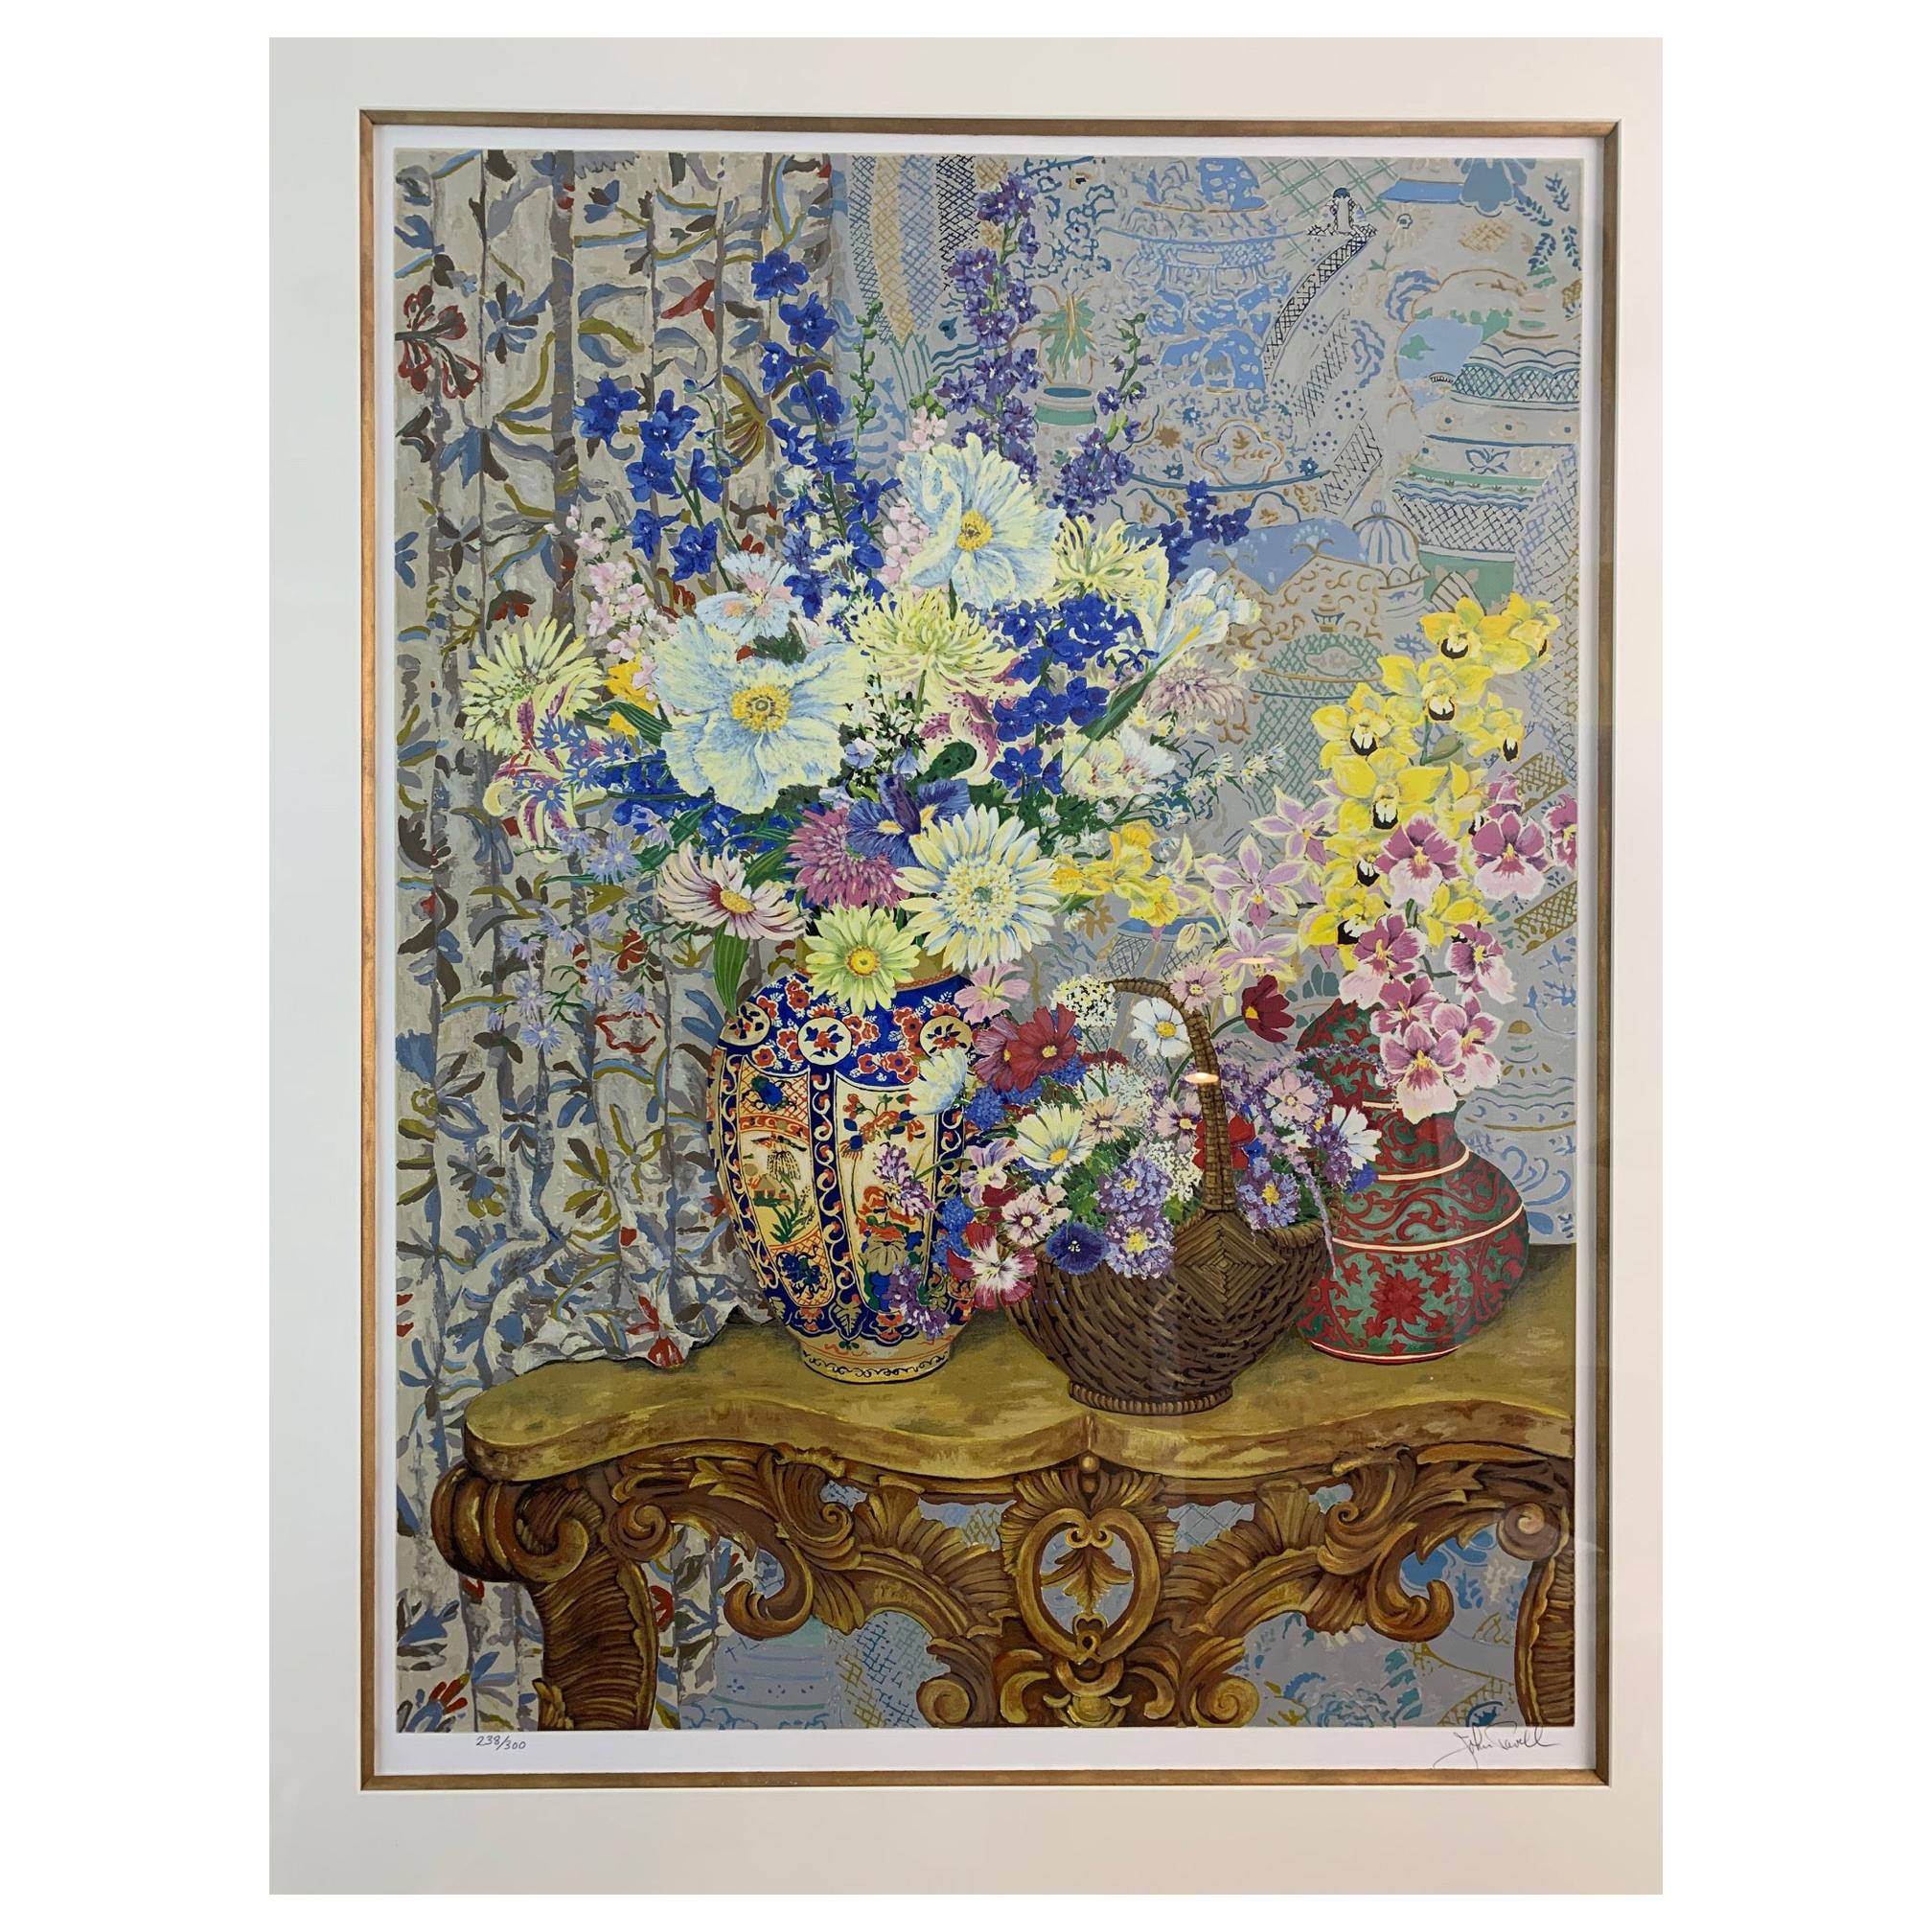 Magnificent Limited Edition Serigraph Still Life by John Powell